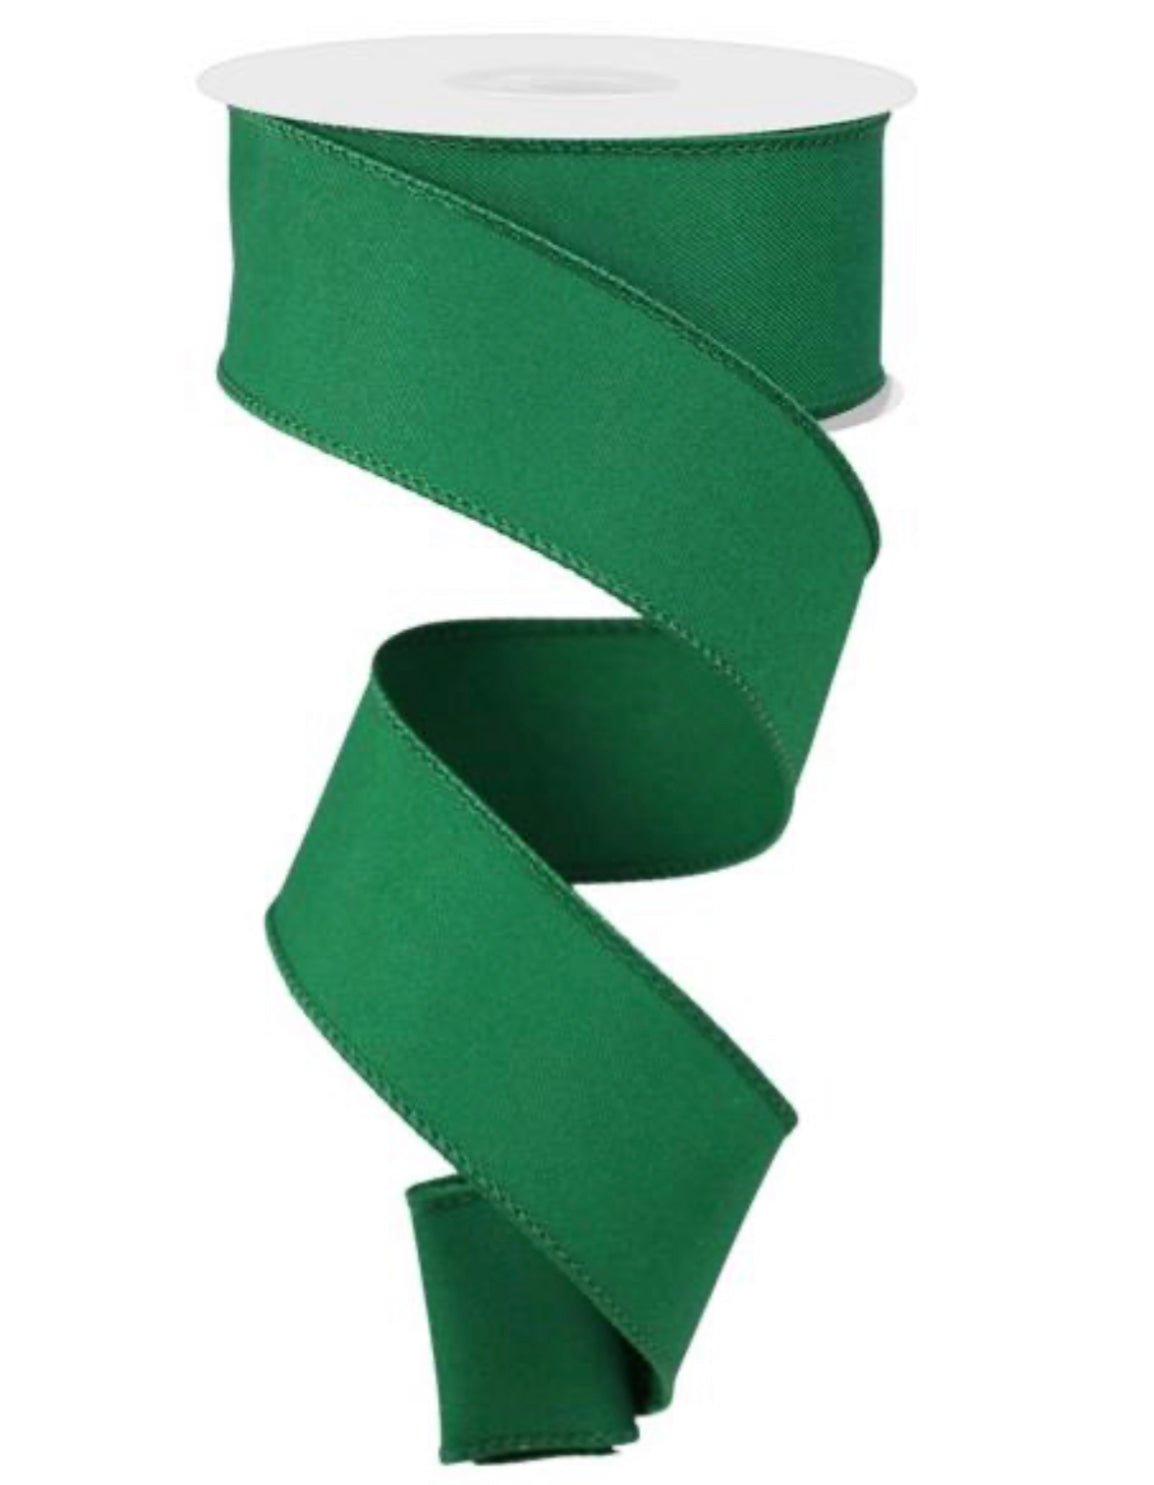 Emerald Green Ribbons 1/4 wide Pre-Cut to ANY LENGTH YOU NEED!